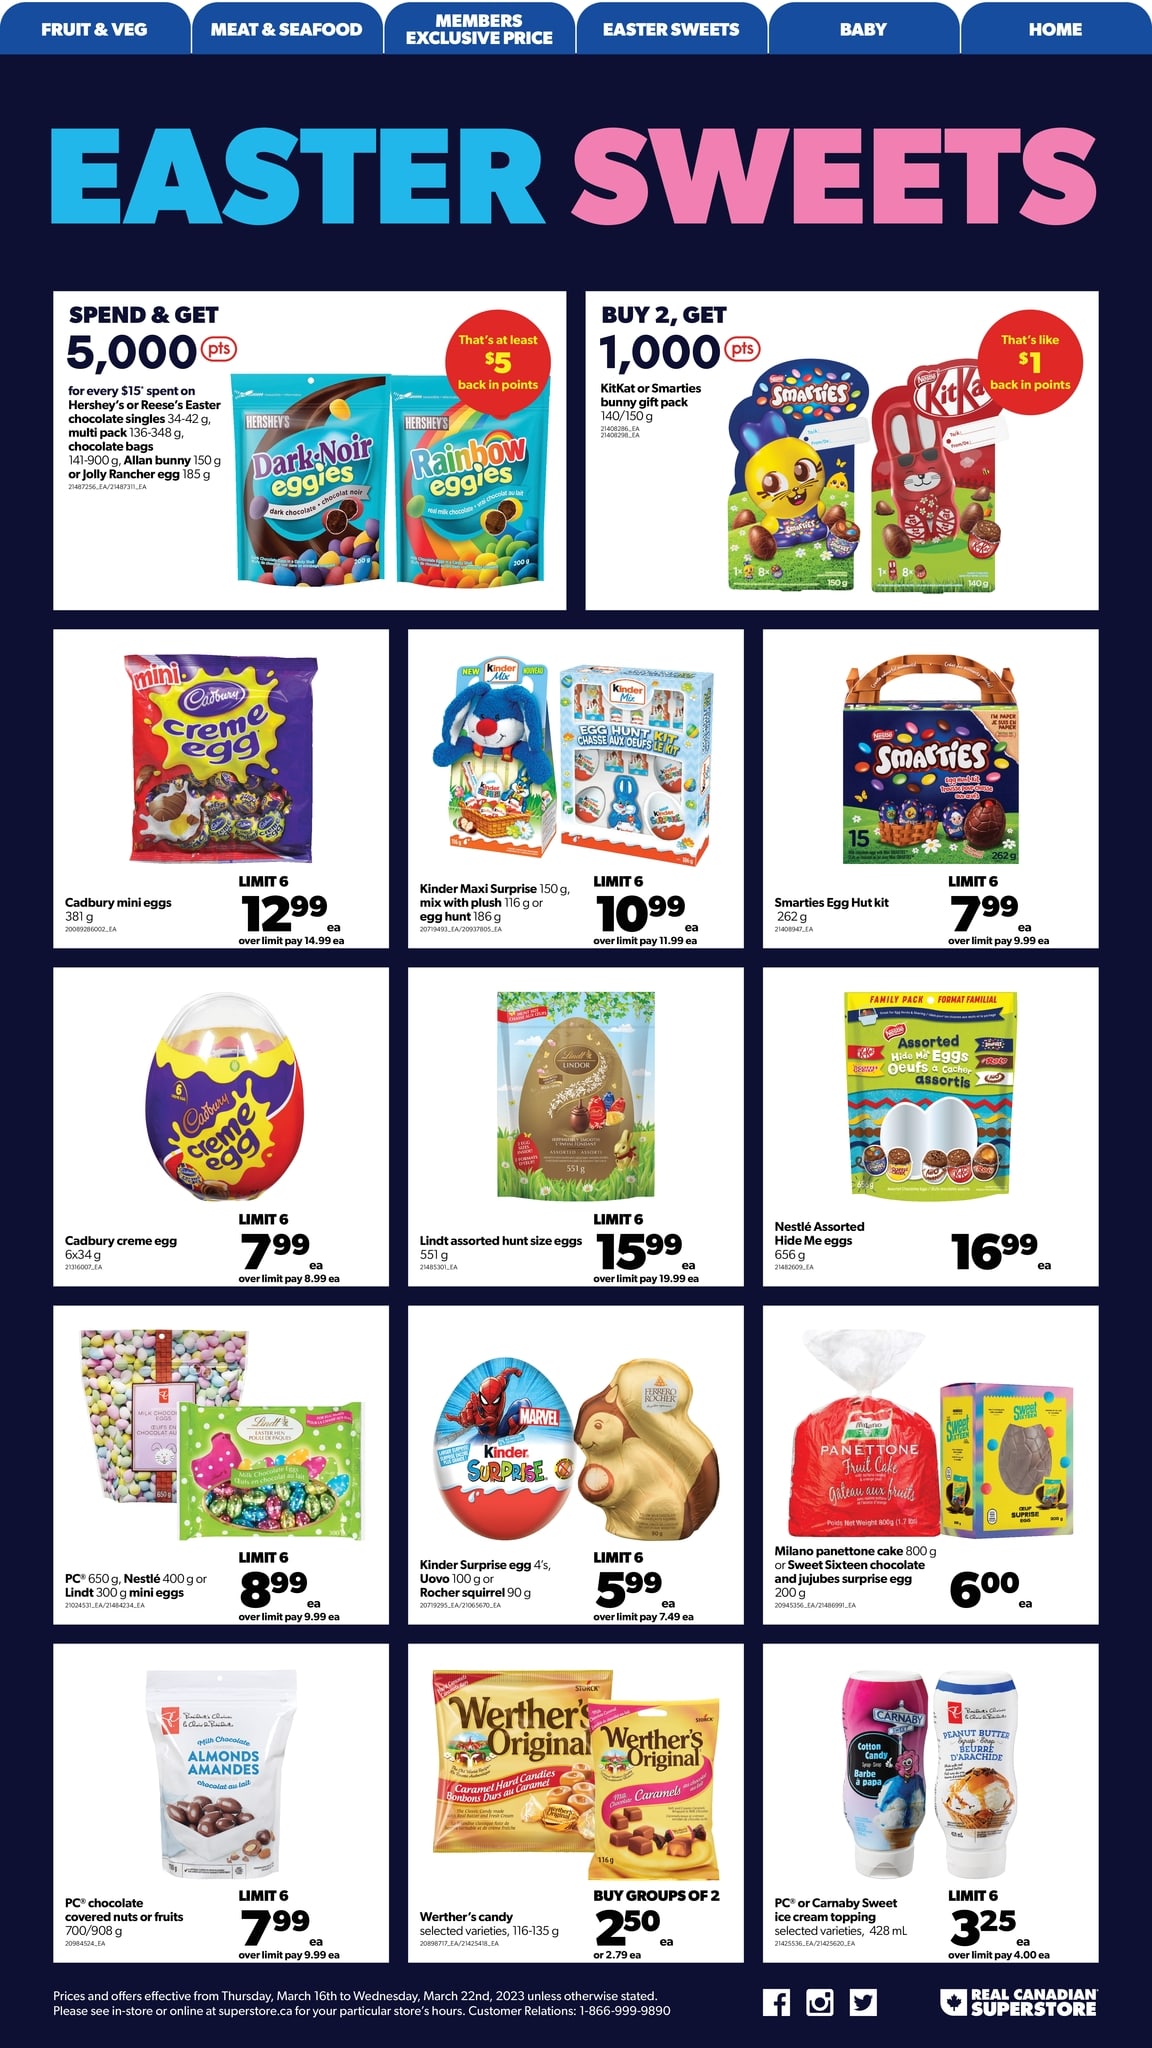 Real Canadian Superstore - Western Canada - Weekly Flyer Specials - Page 9